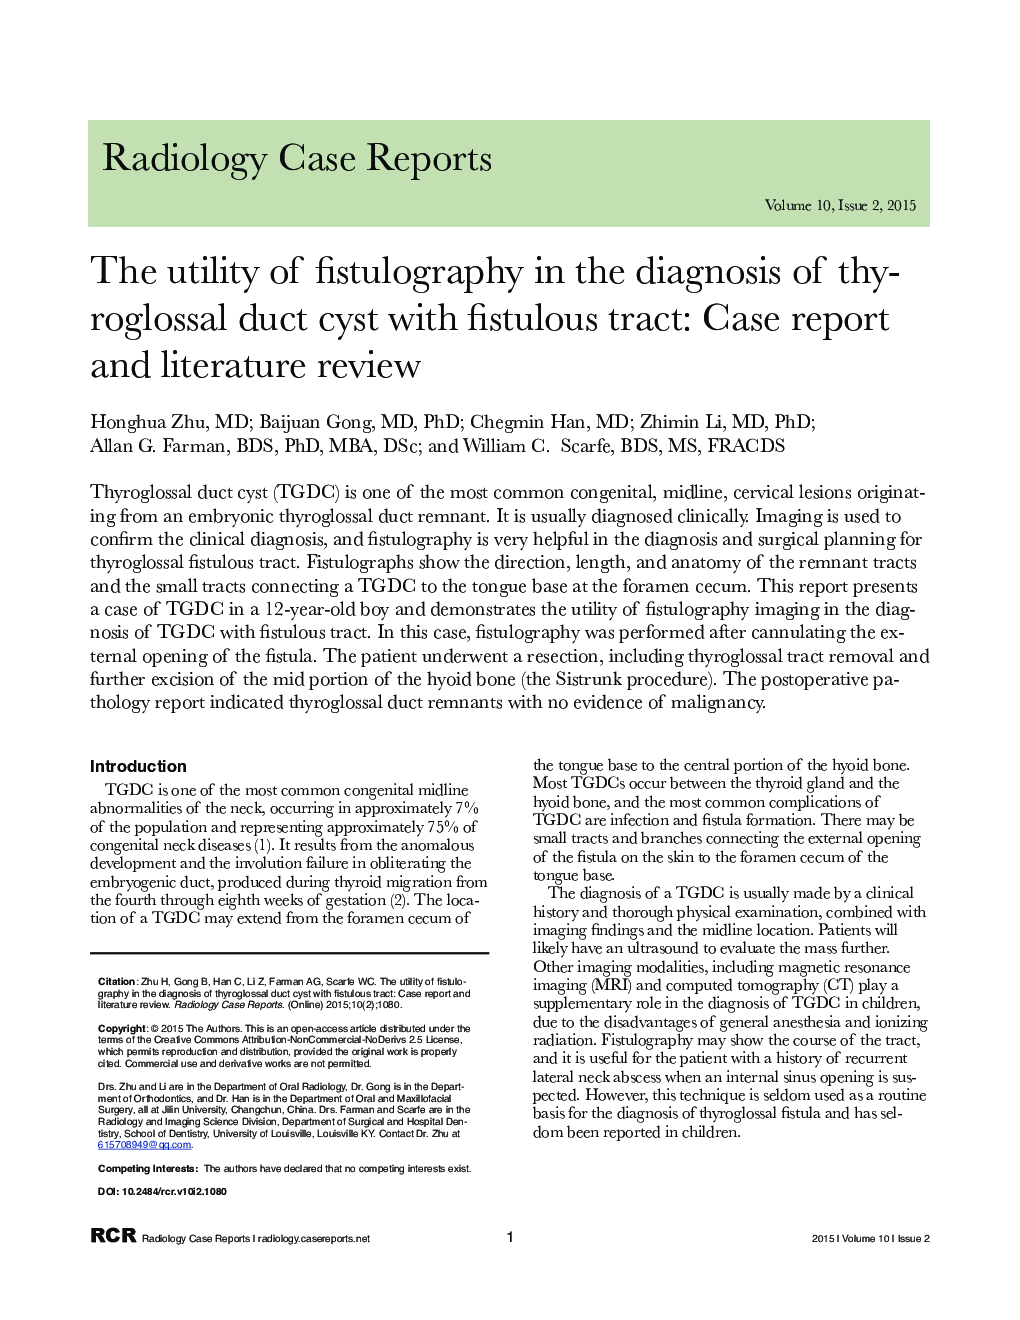 The utility of fistulography in the diagnosis of thyroglossal duct cyst with fistulous tract: Case report and literature review